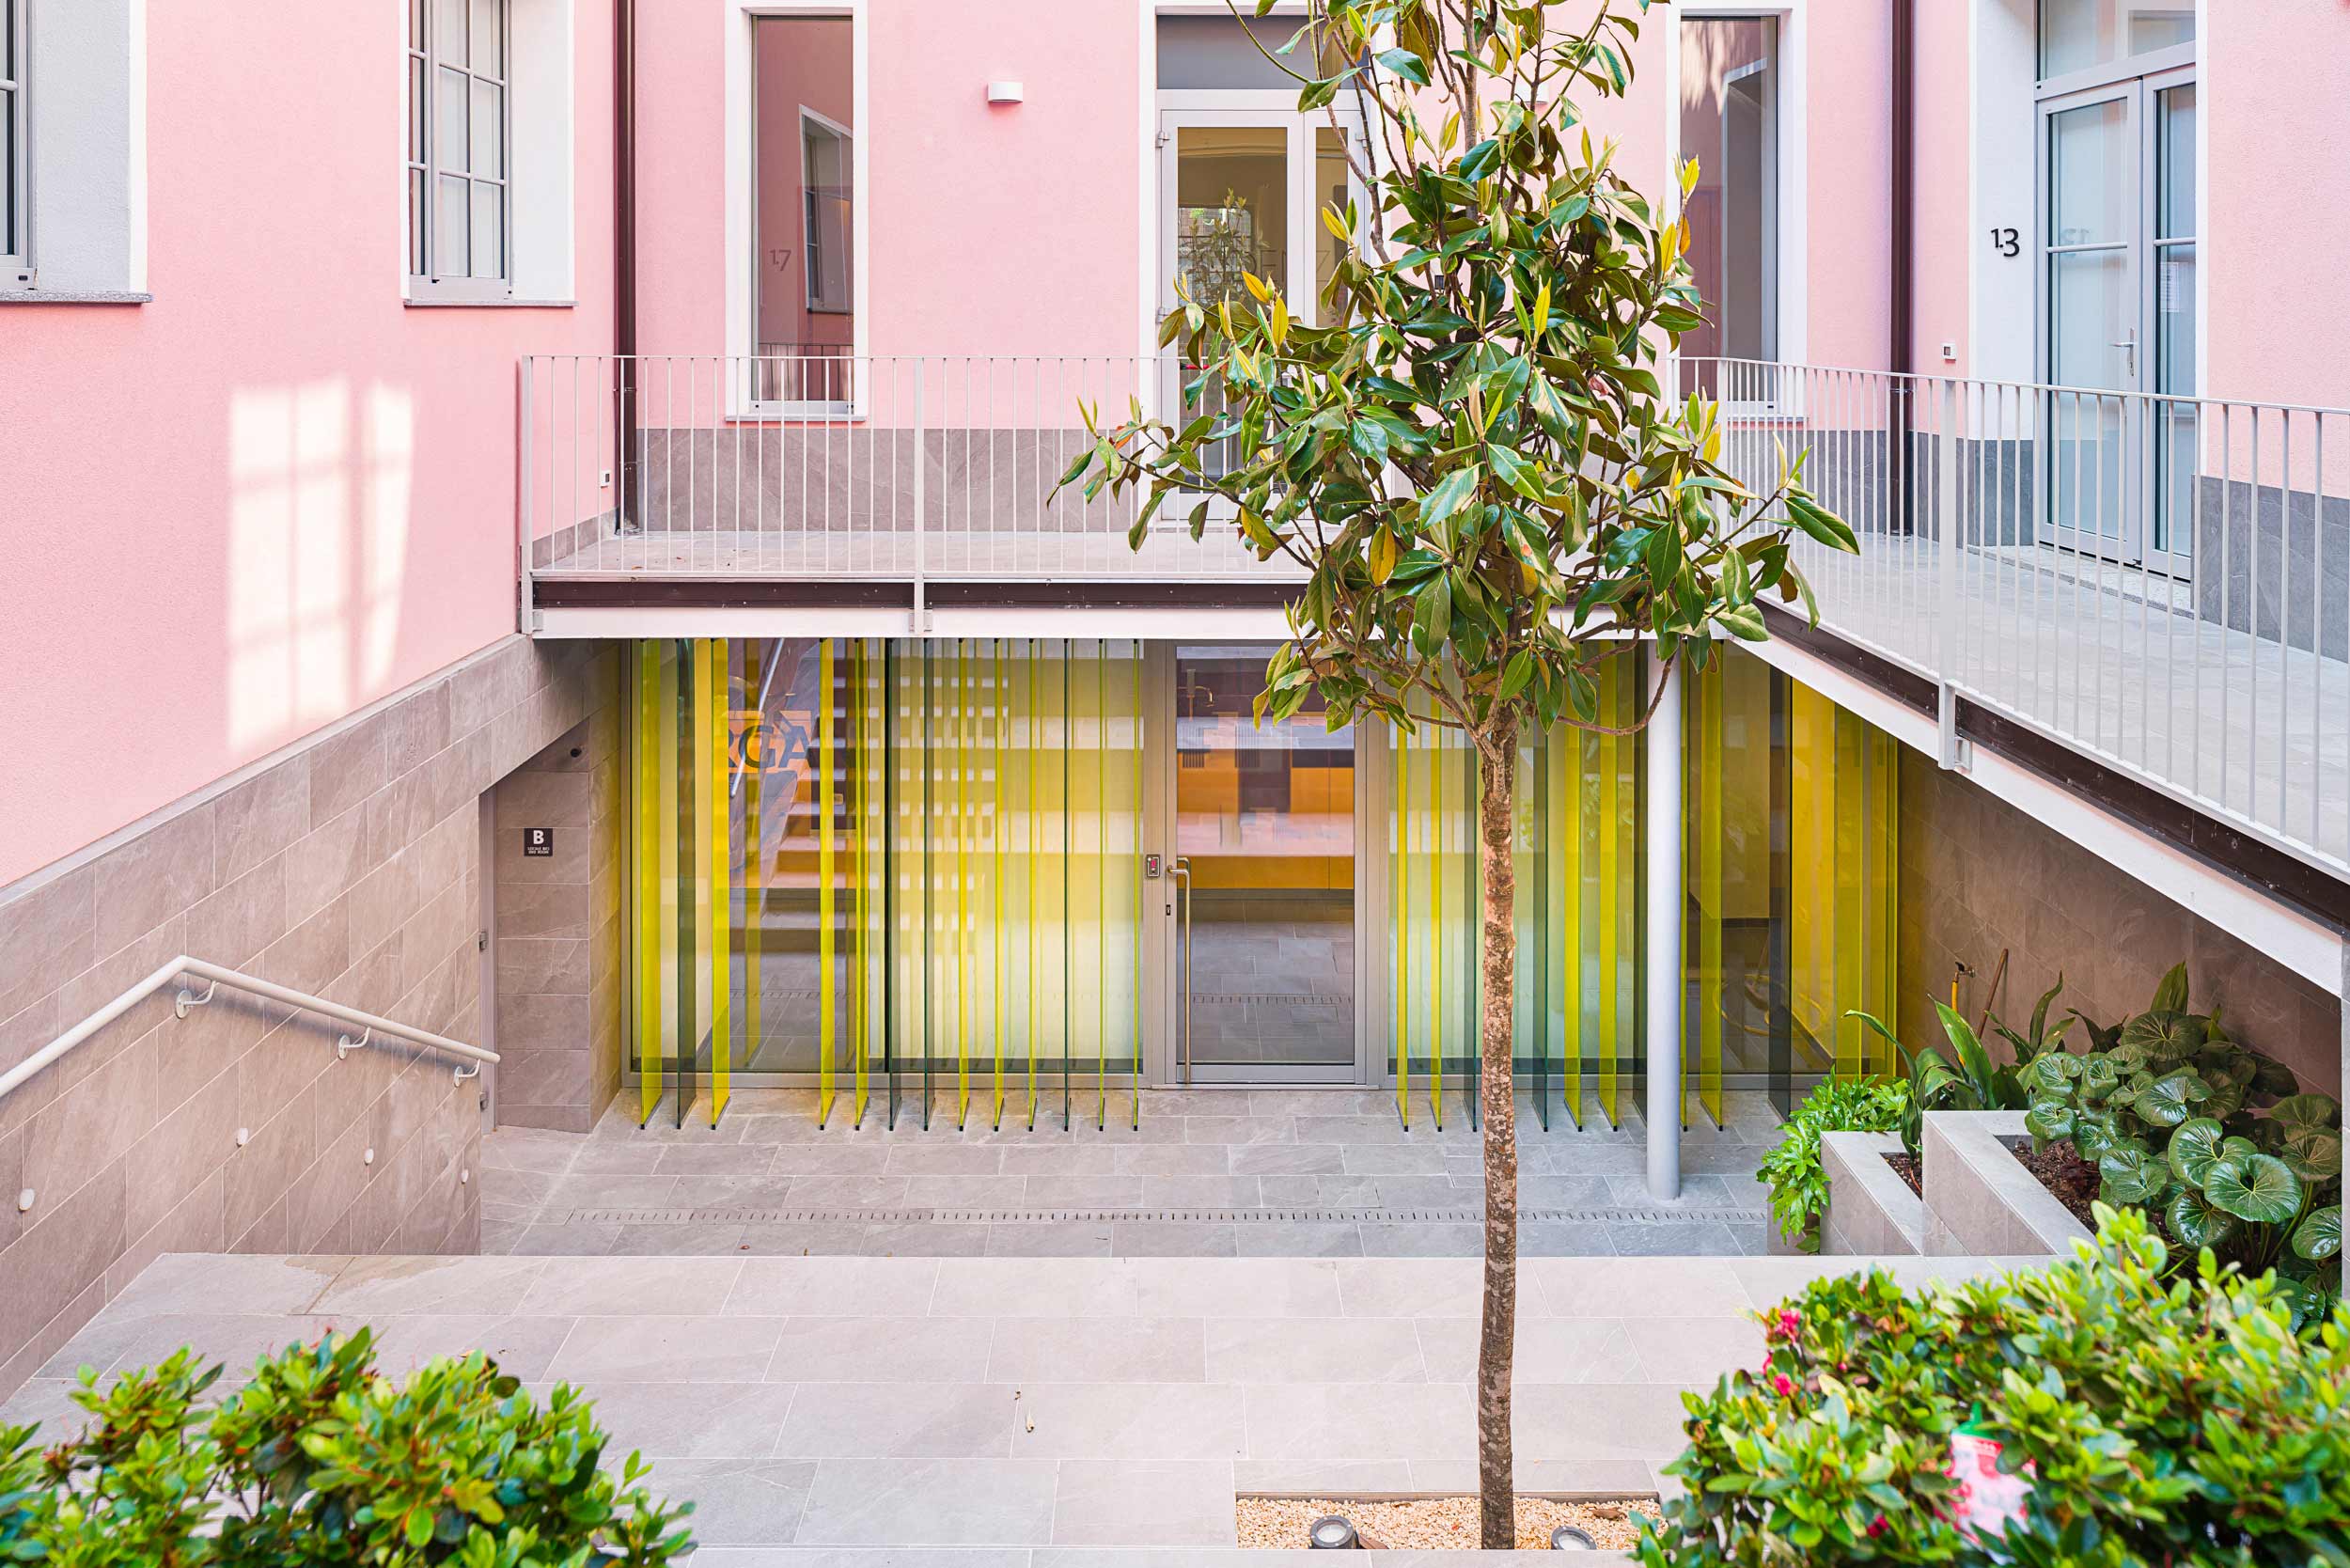 External of Residenza Dergano - Short Rent Term project in Milan by arcHITects